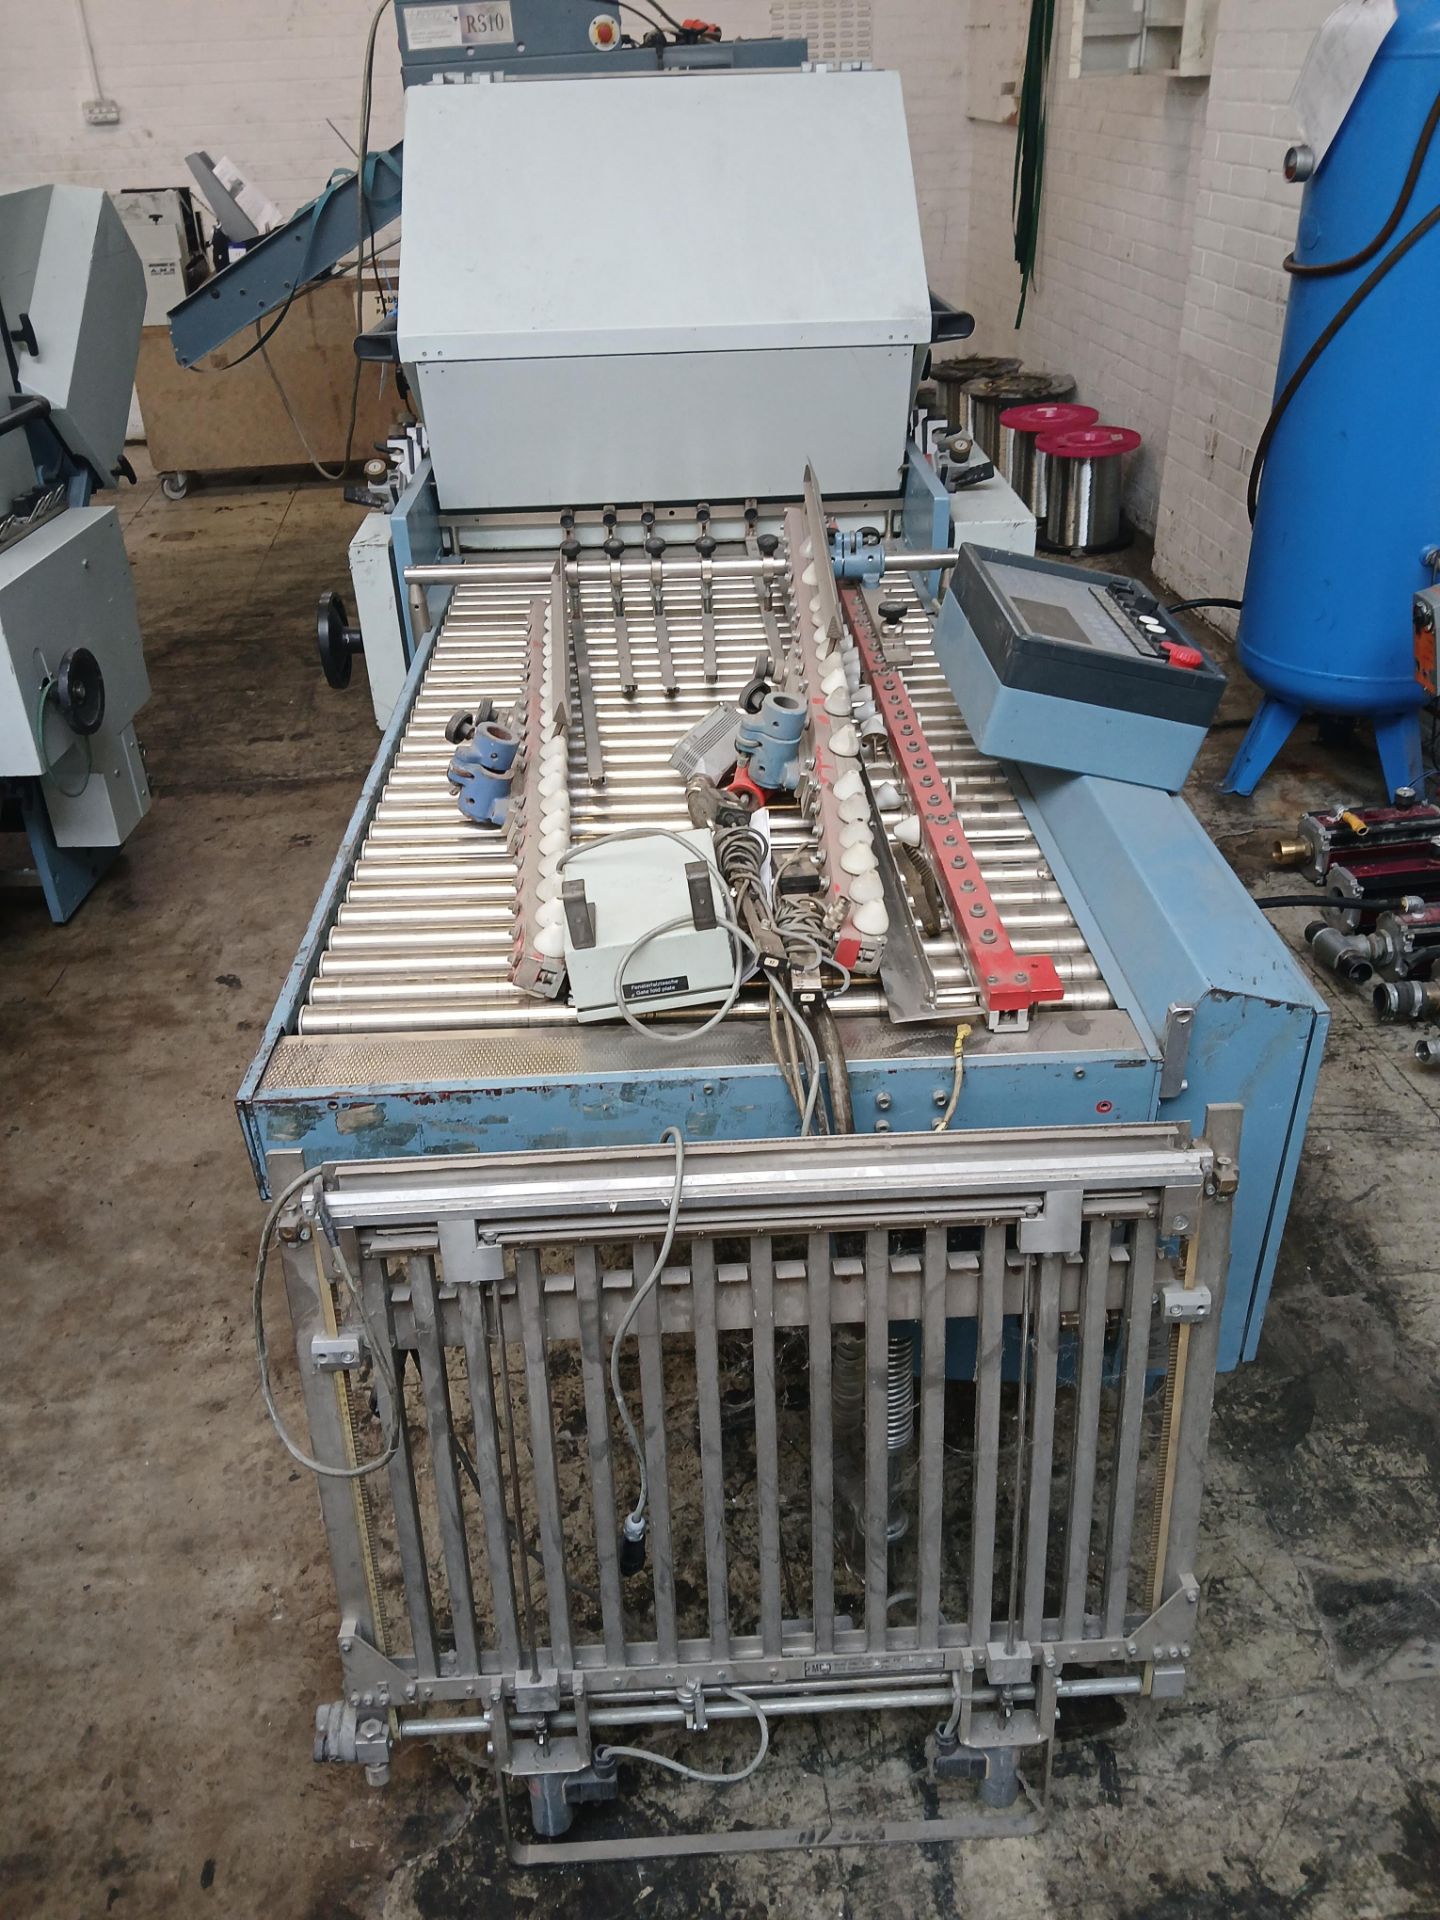 MBO T700 – 2 – 68/4 VN 2nd folding unit, Serial Number 003 19875 with additional double gate fold - Image 3 of 8